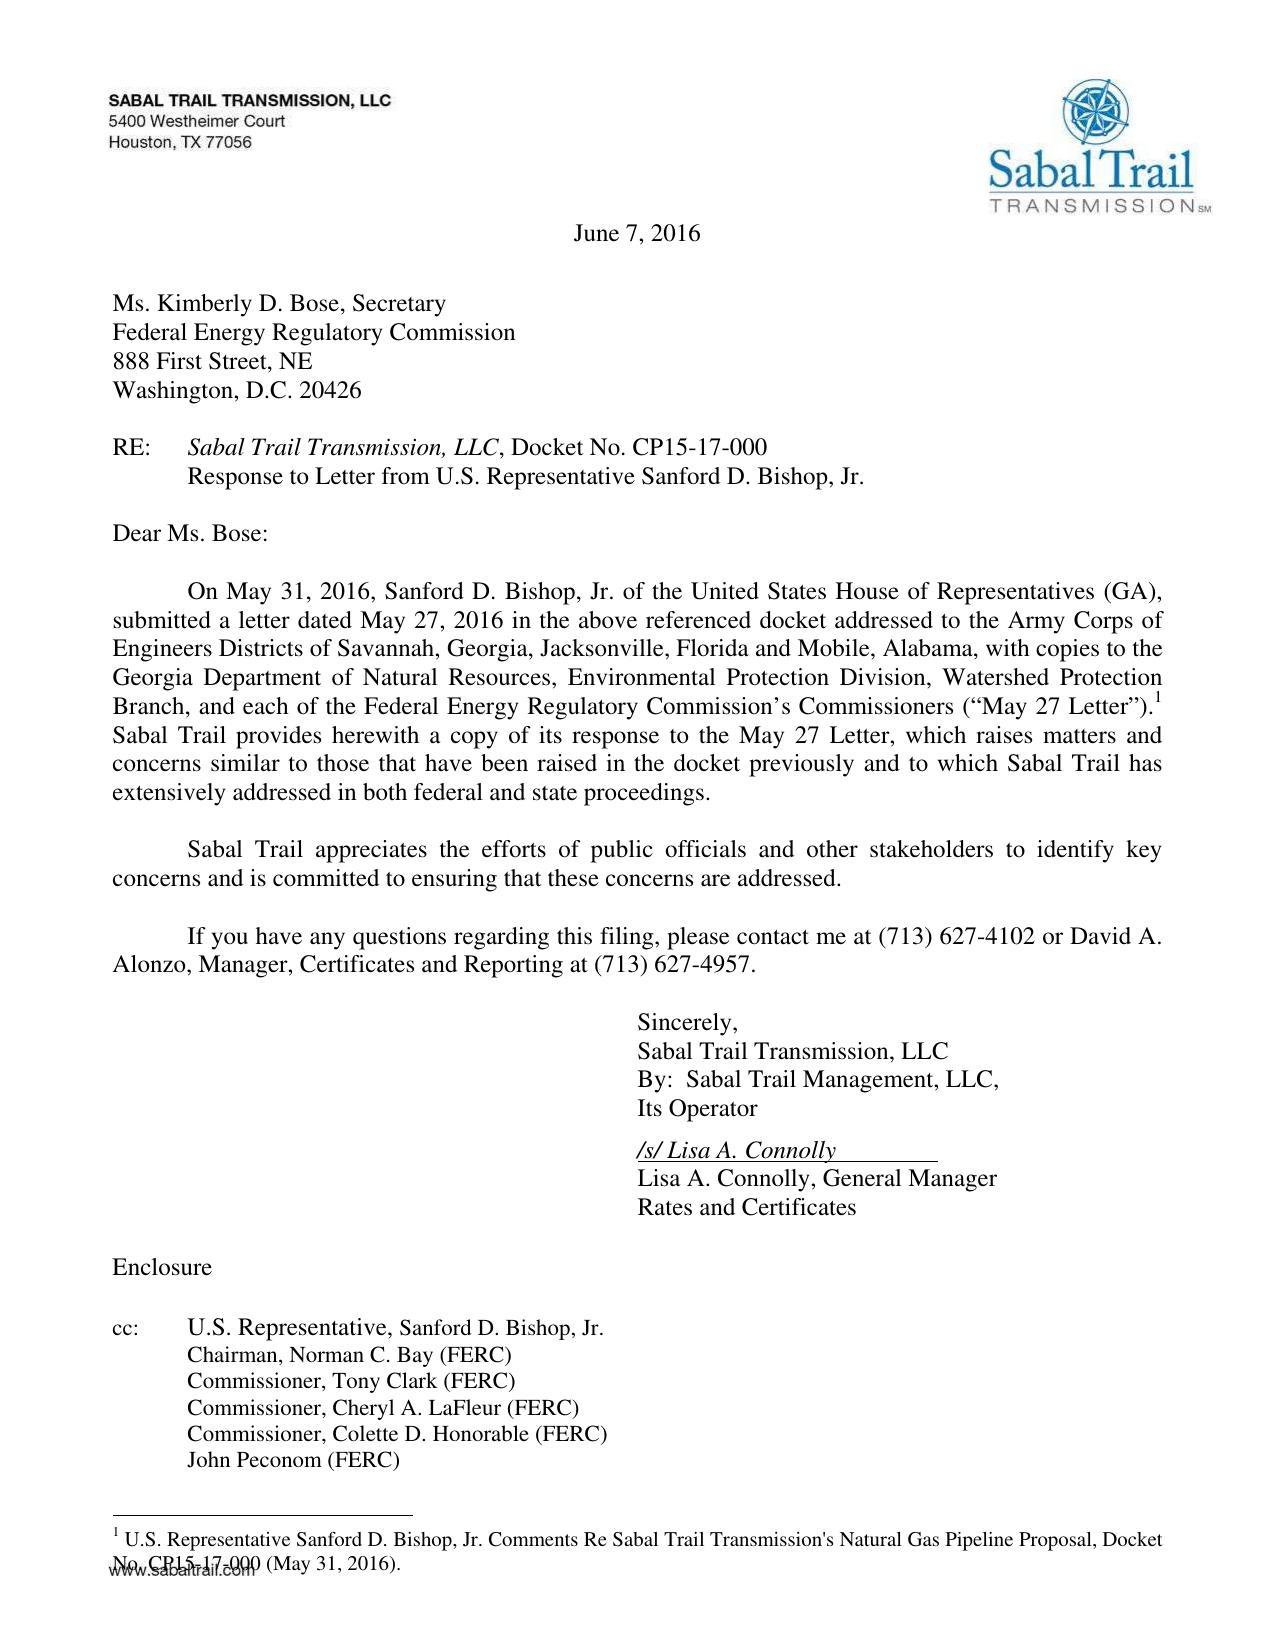 1275x1651 Cover letter, in Response to Letter from U.S. Representative Sanford D. Bishop, Jr., by Sabal Trail, 7 June 2016